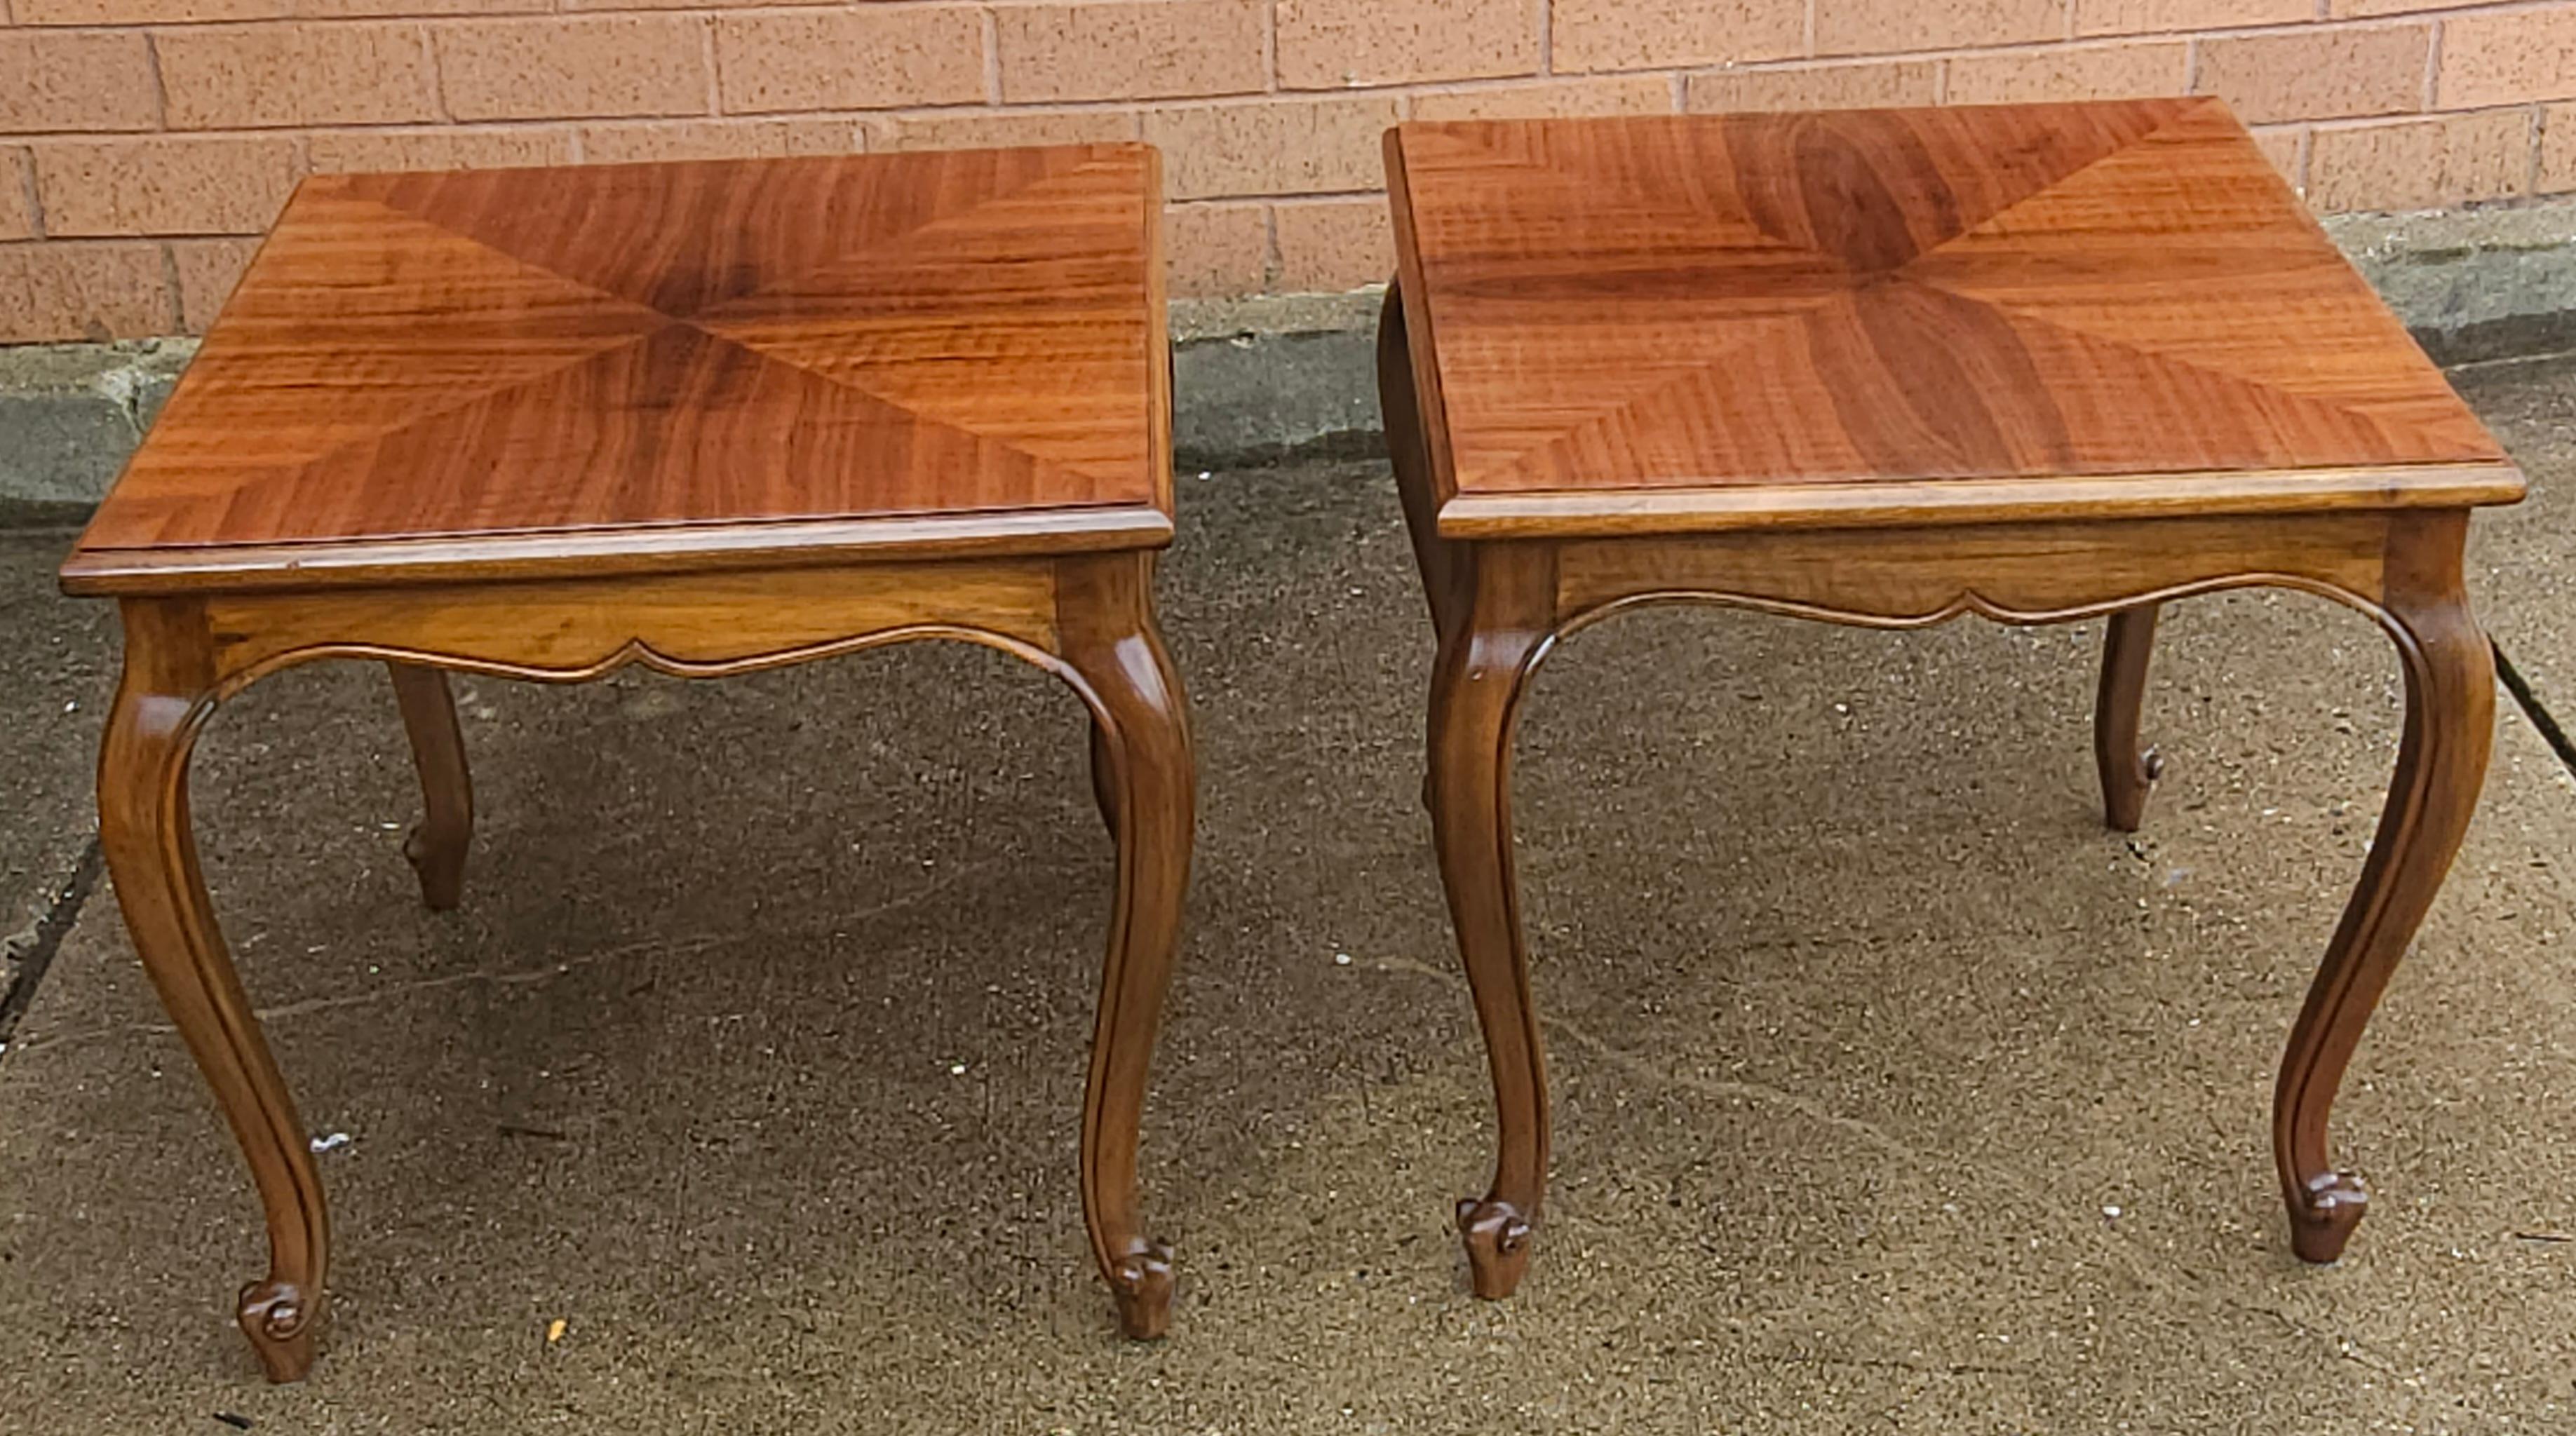 20th C. Handcrafted Bookmatched Brazilian Rosewood Provincial Side Tables, Pair In Good Condition For Sale In Germantown, MD